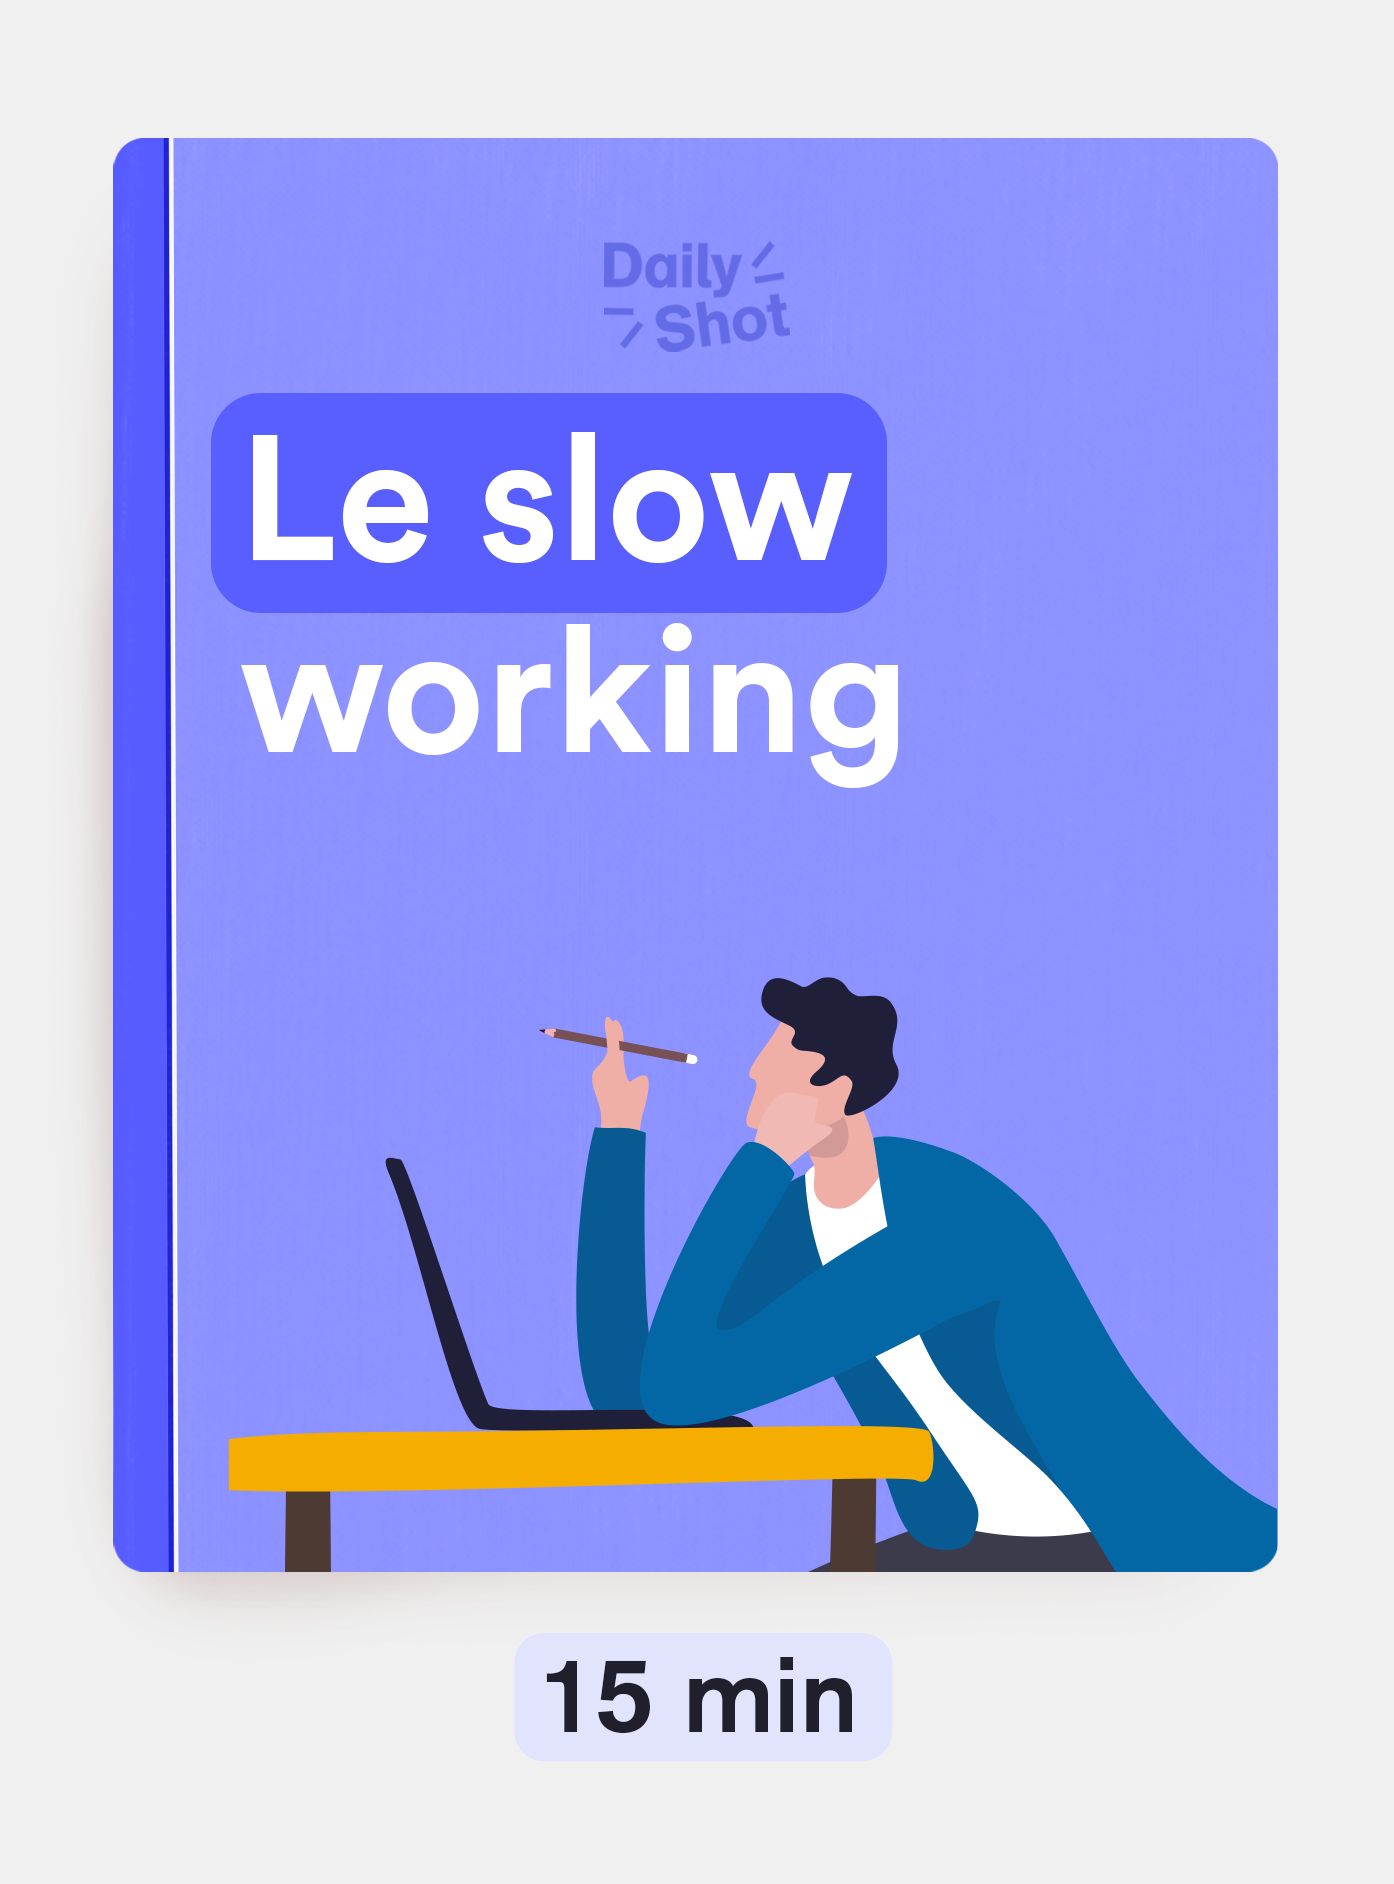 Le slow working